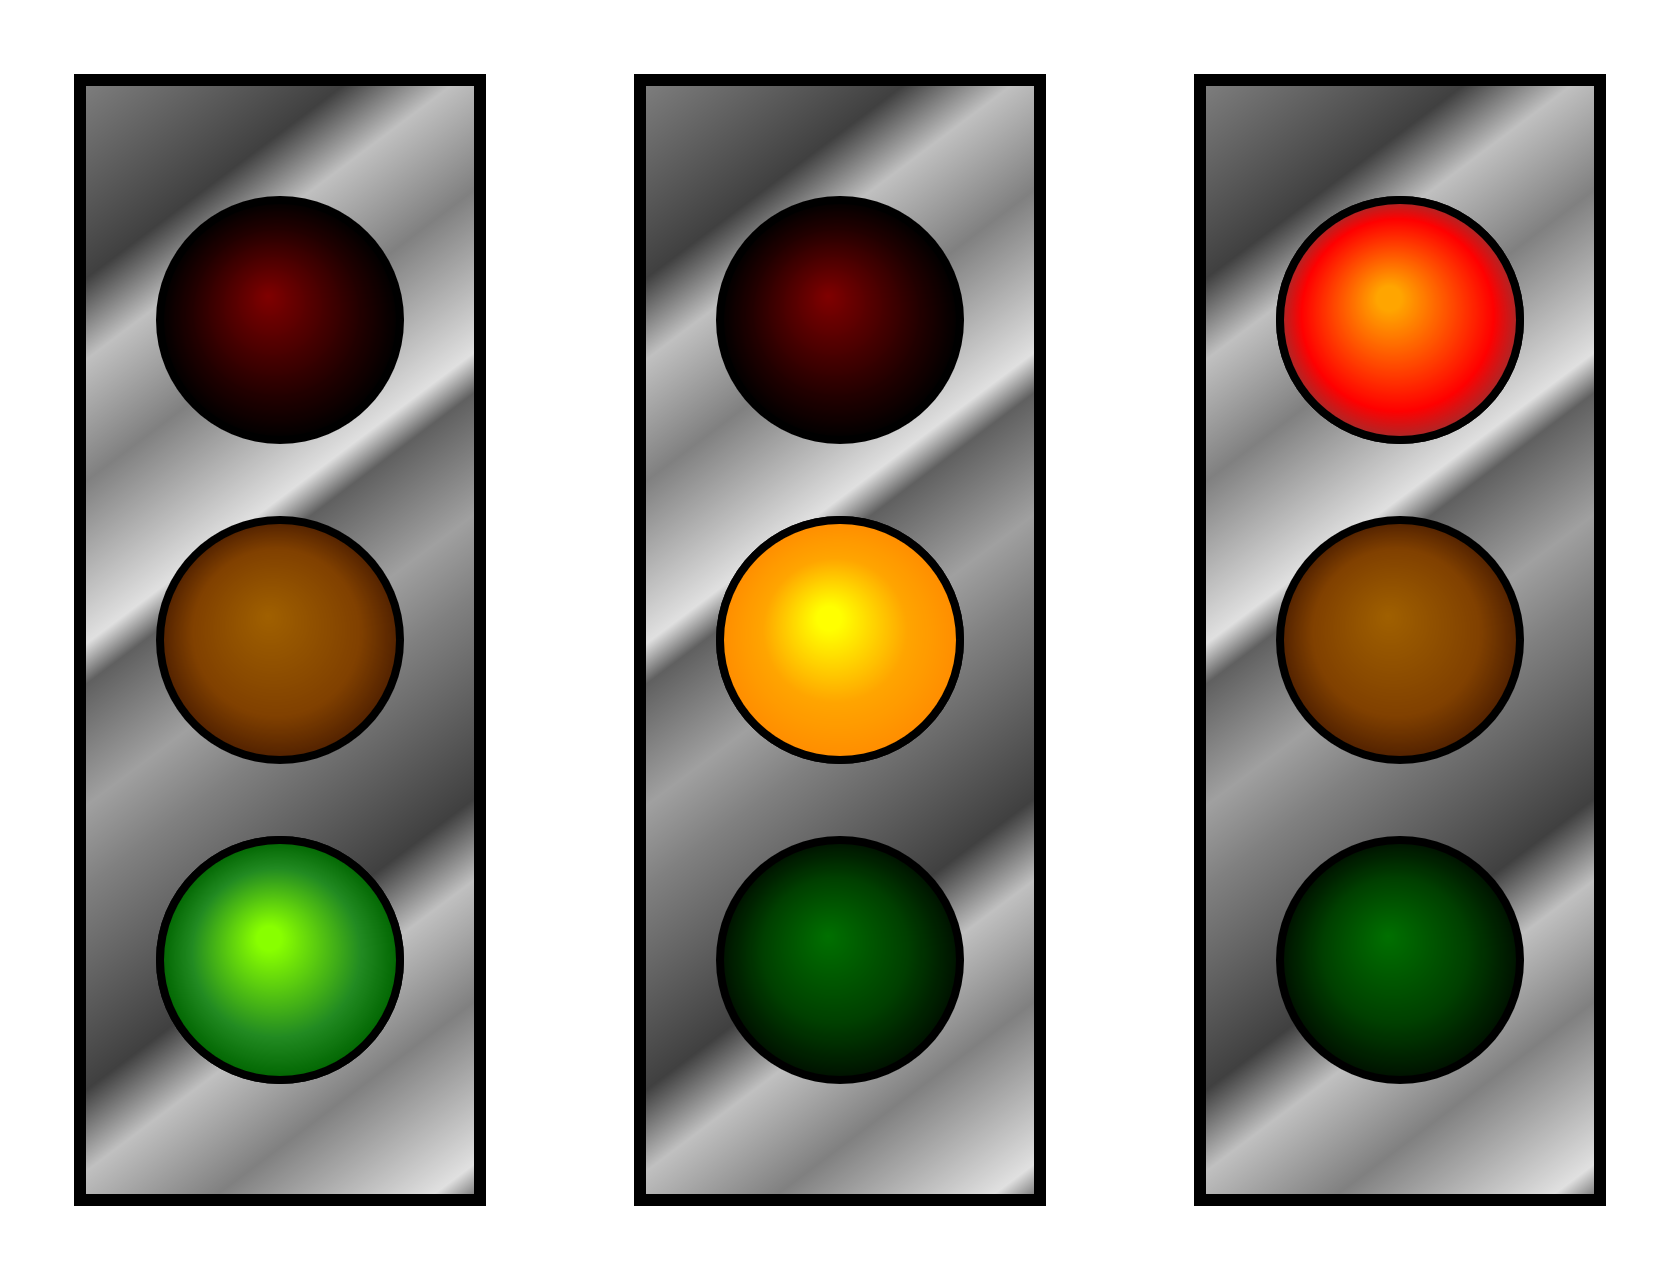 The stoplight graphic from the previous figure, repeated three times. In each one, a different light is bright, and the other lights are dark.